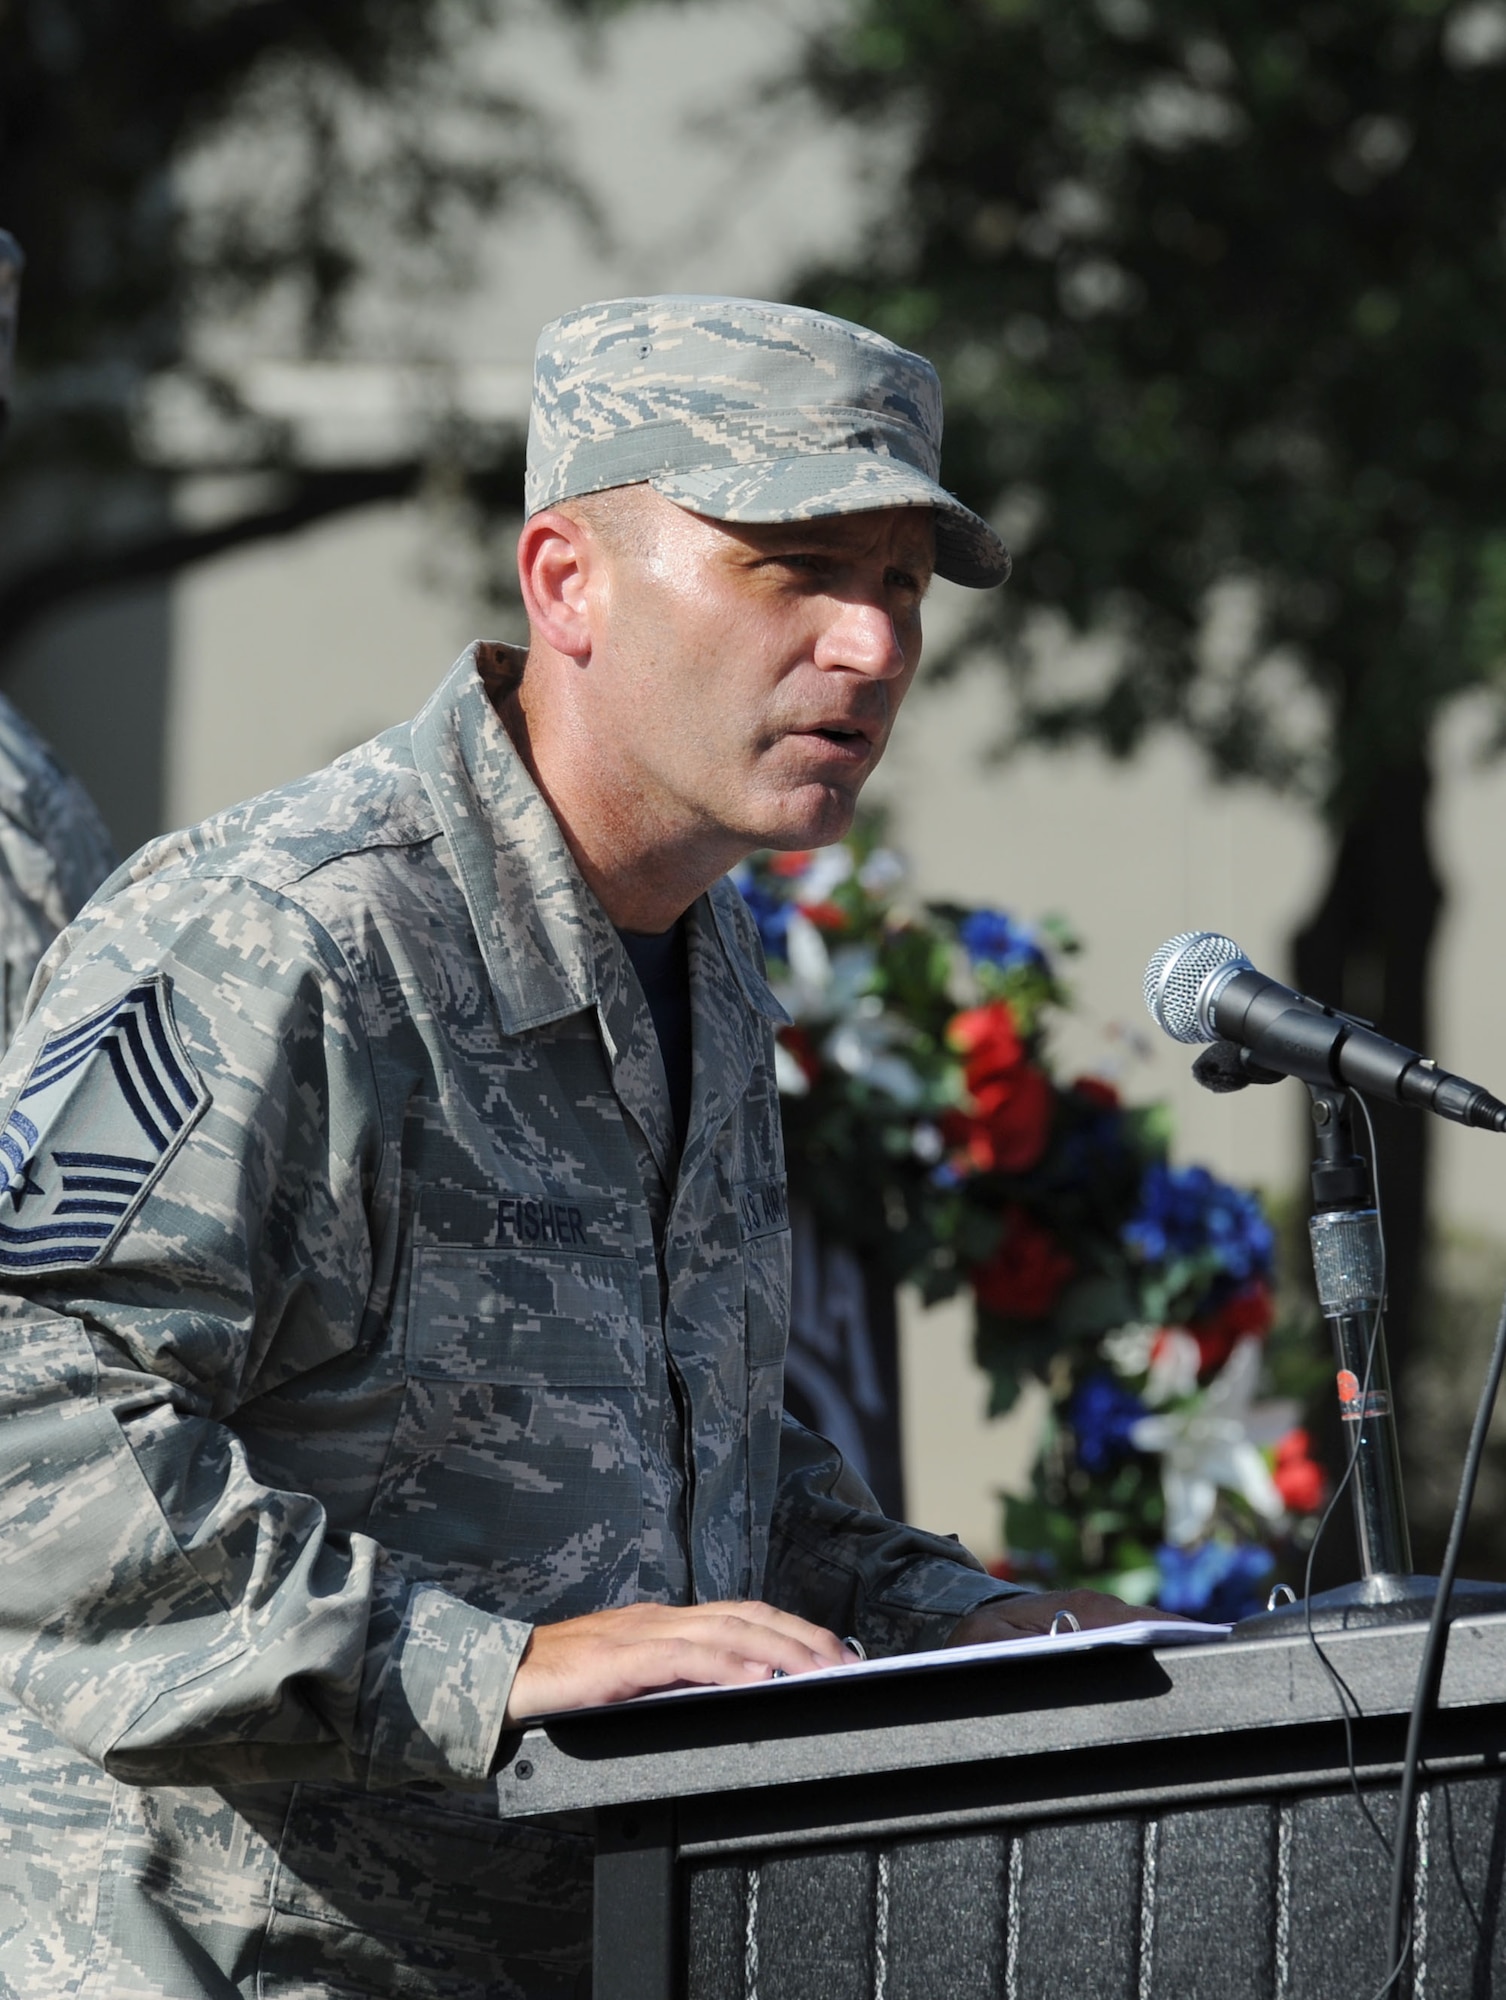 Chief Master Sgt. Anthony Fisher, 81st Training Group superintendent, delivers remarks during the POW/MIA Retreat Ceremony Sept. 15, 2017, on Keesler Air Force Base, Mississippi. The event, hosted by the Air Force Sergeants Association Chapter 652, was held to raise awareness and pay tribute to all prisoners of war and military members still missing in action. (U.S. Air Force photo by Kemberly Groue)